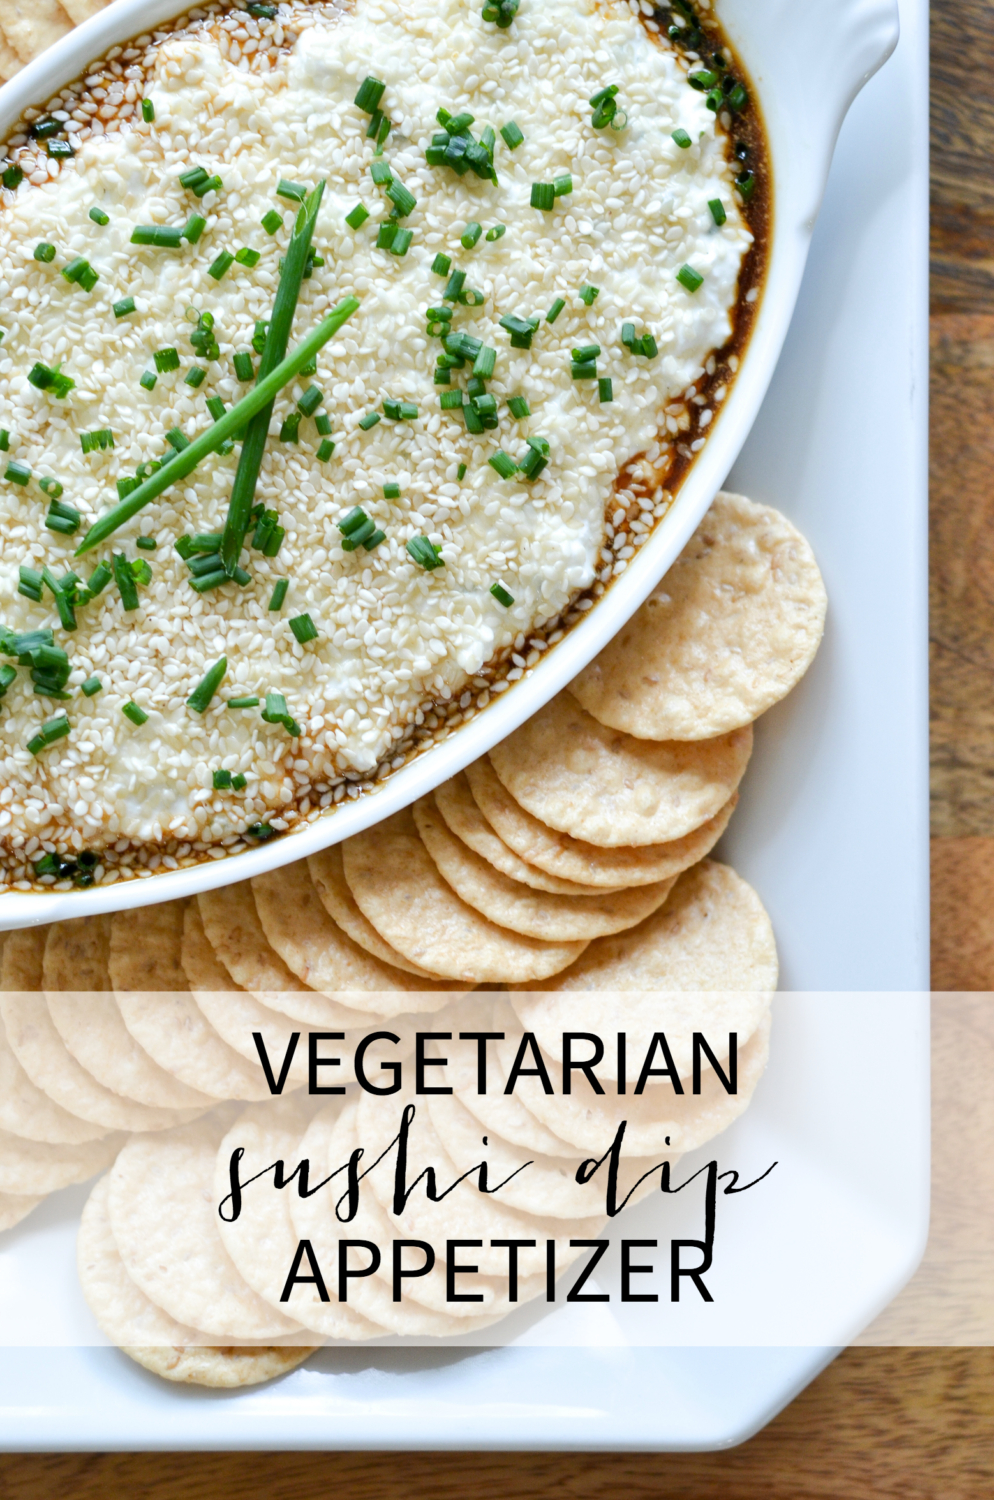 A vegetarian sushi dip appetizer recipe that has all the sushi flavor you love and none of the work of making sushi at home!